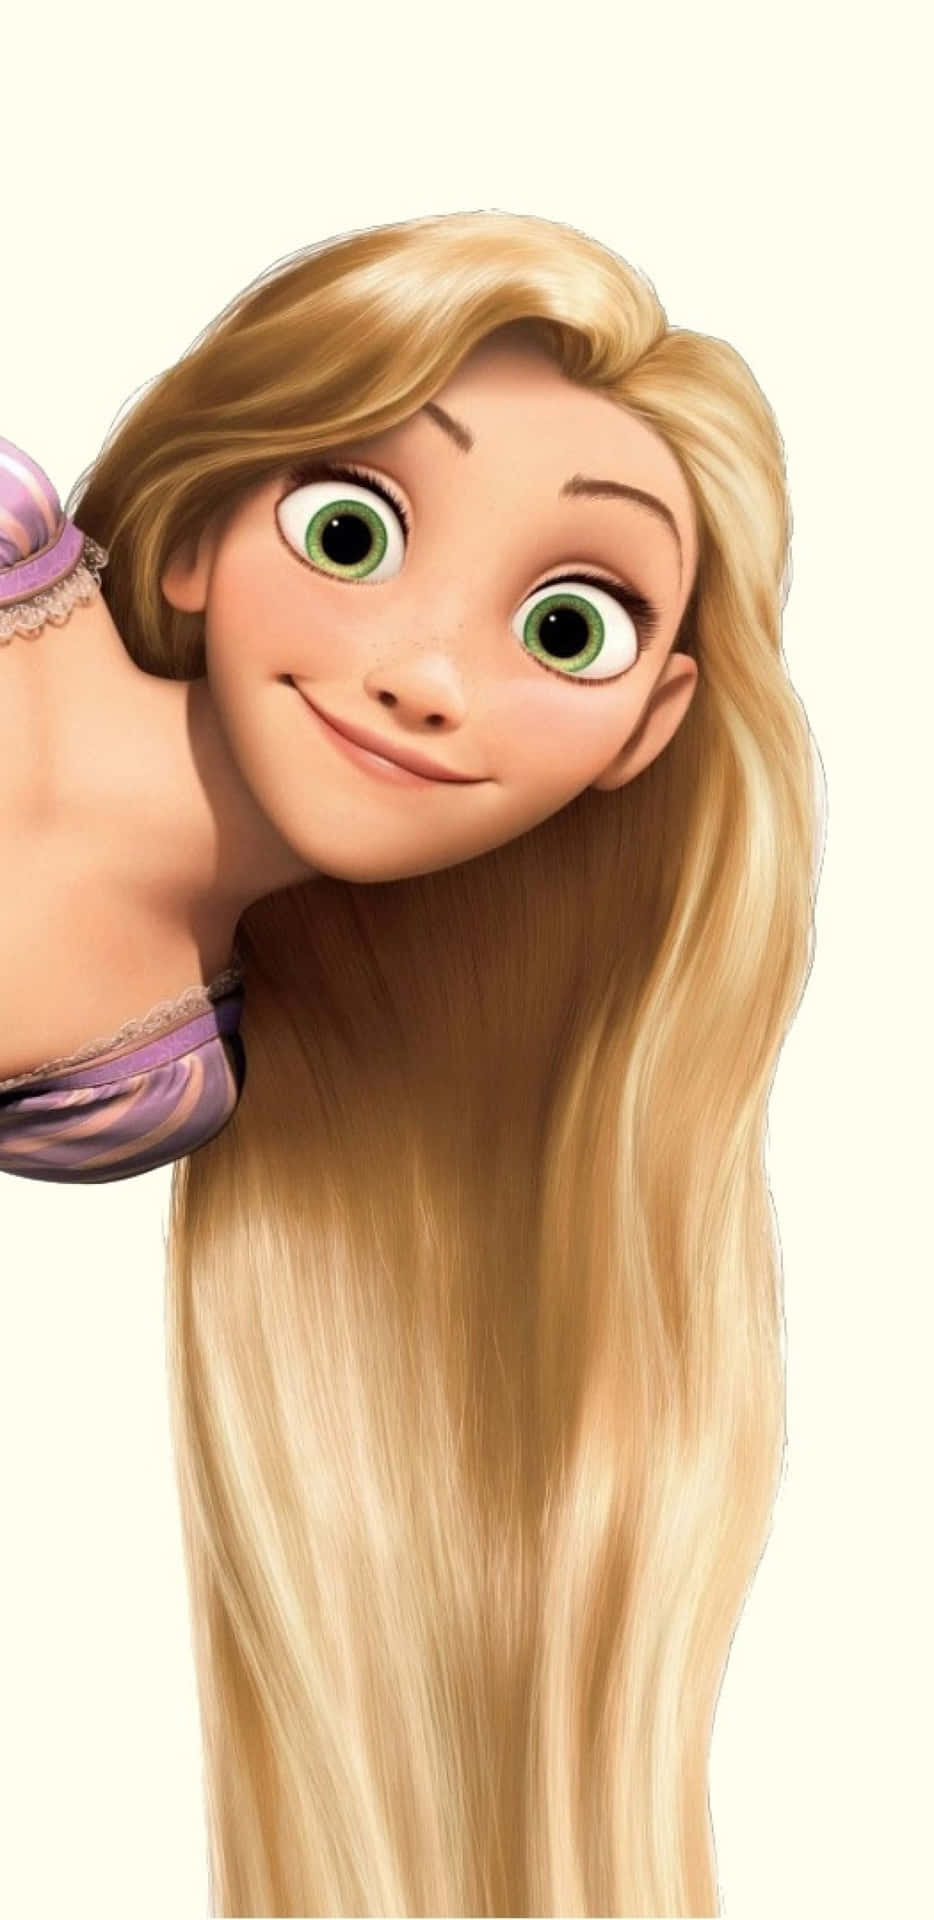 "rapunzel In A World Beyond The Tower"